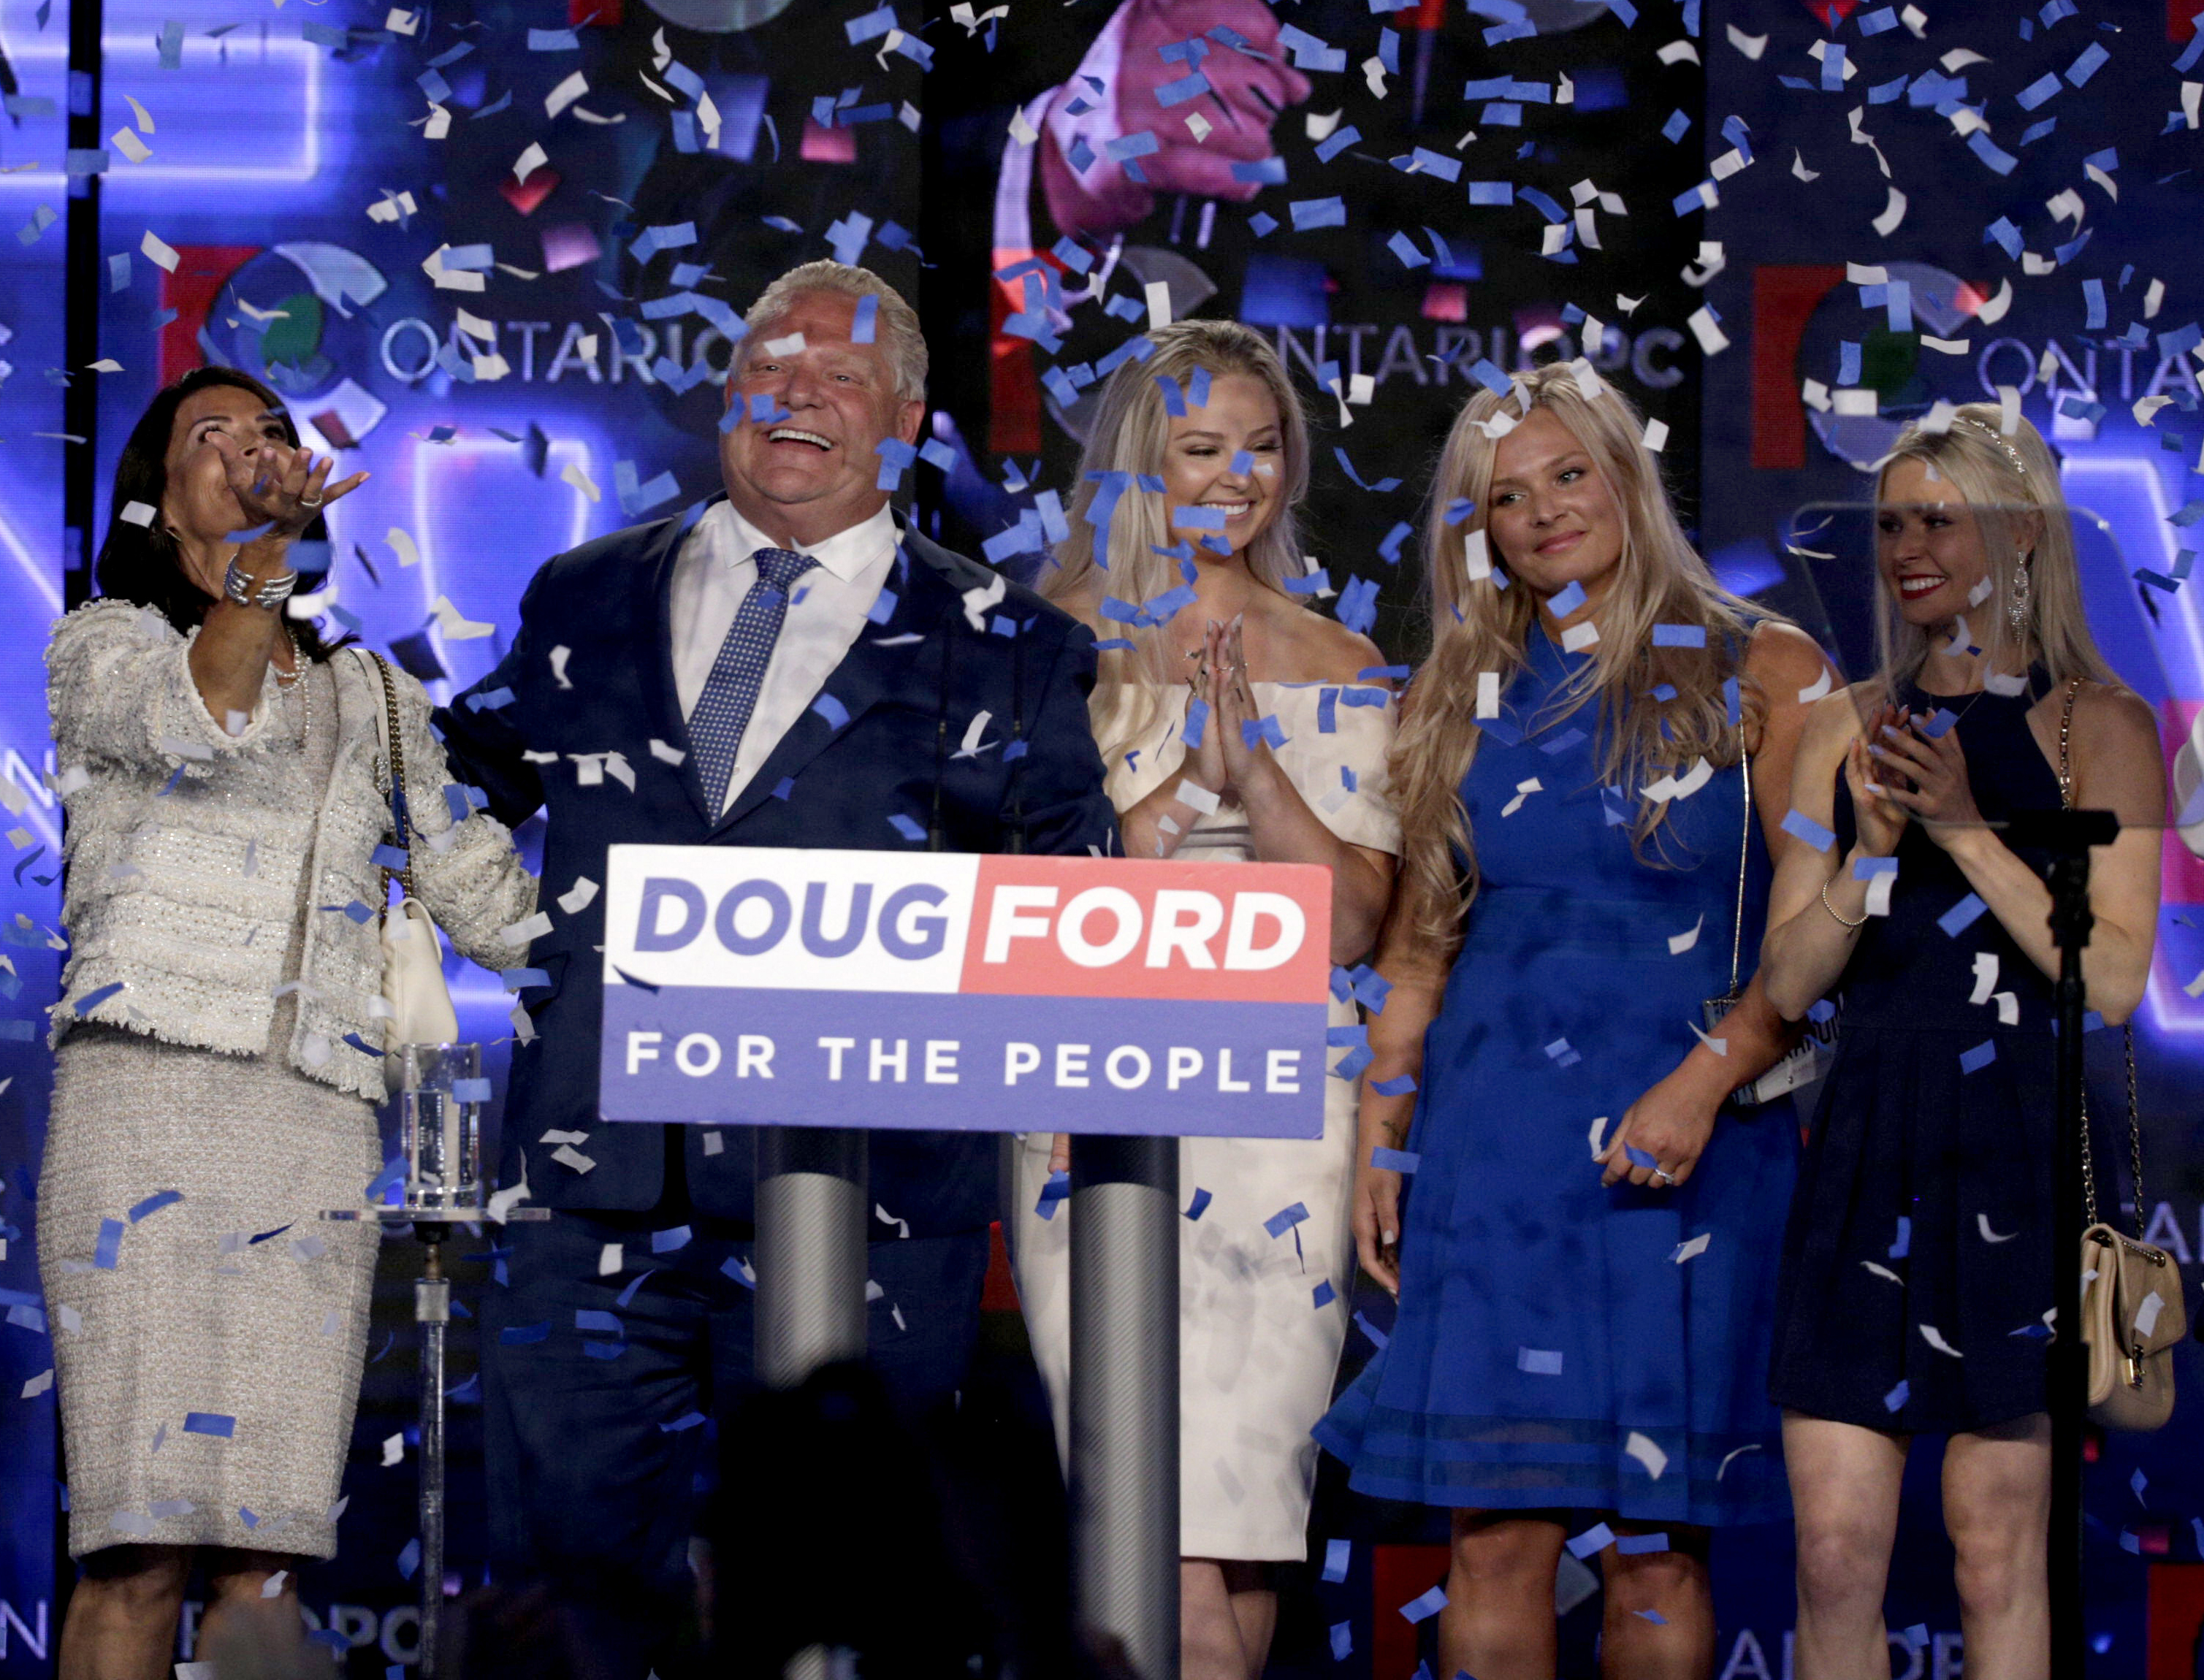 Ford's PCs widen gap with voters, but are in minority range: poll